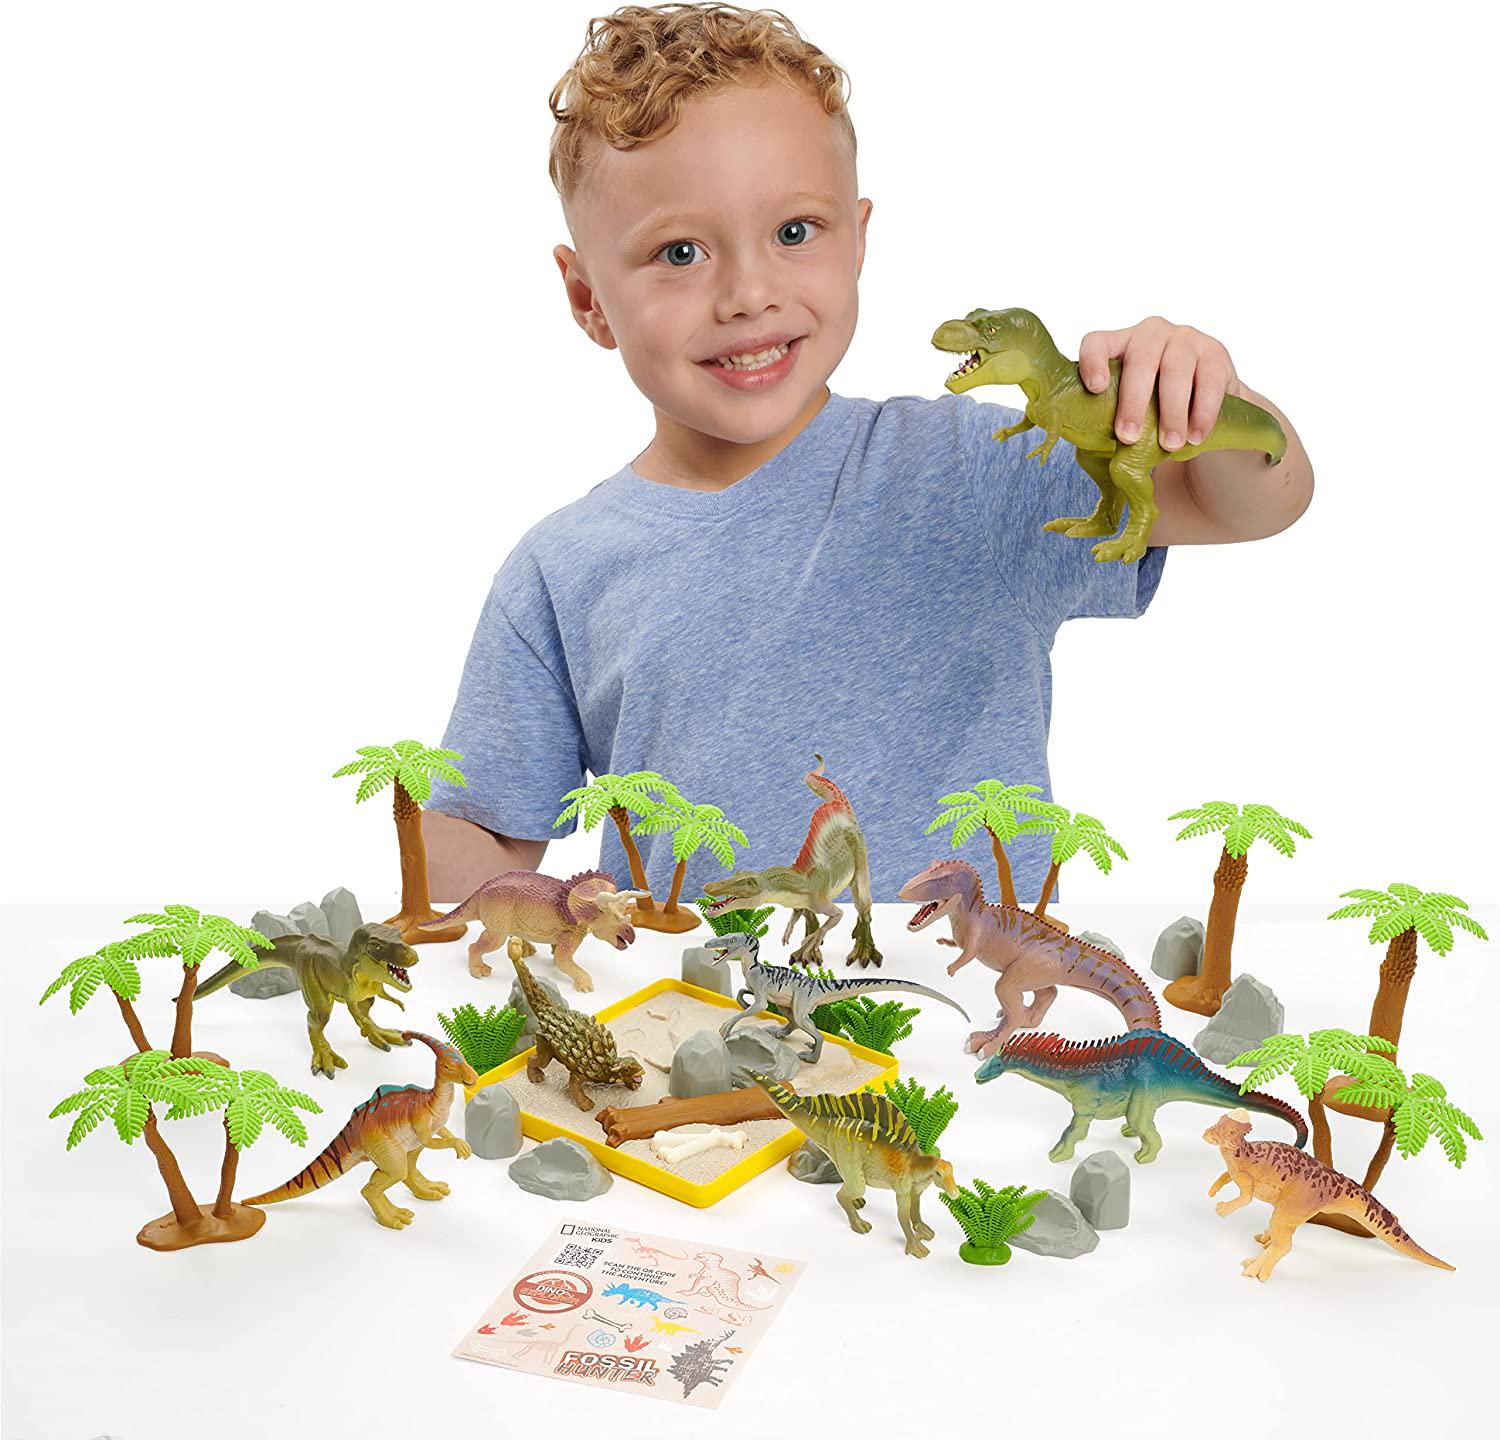 National Geographic, Just Play National Geographic Kids Tub of Realistic Dinosaur Toy Figures, QR Code to T Rex, Triceratops, Velociraptor Facts, Packaging from Recycled Material, Storage Container, Exclusive